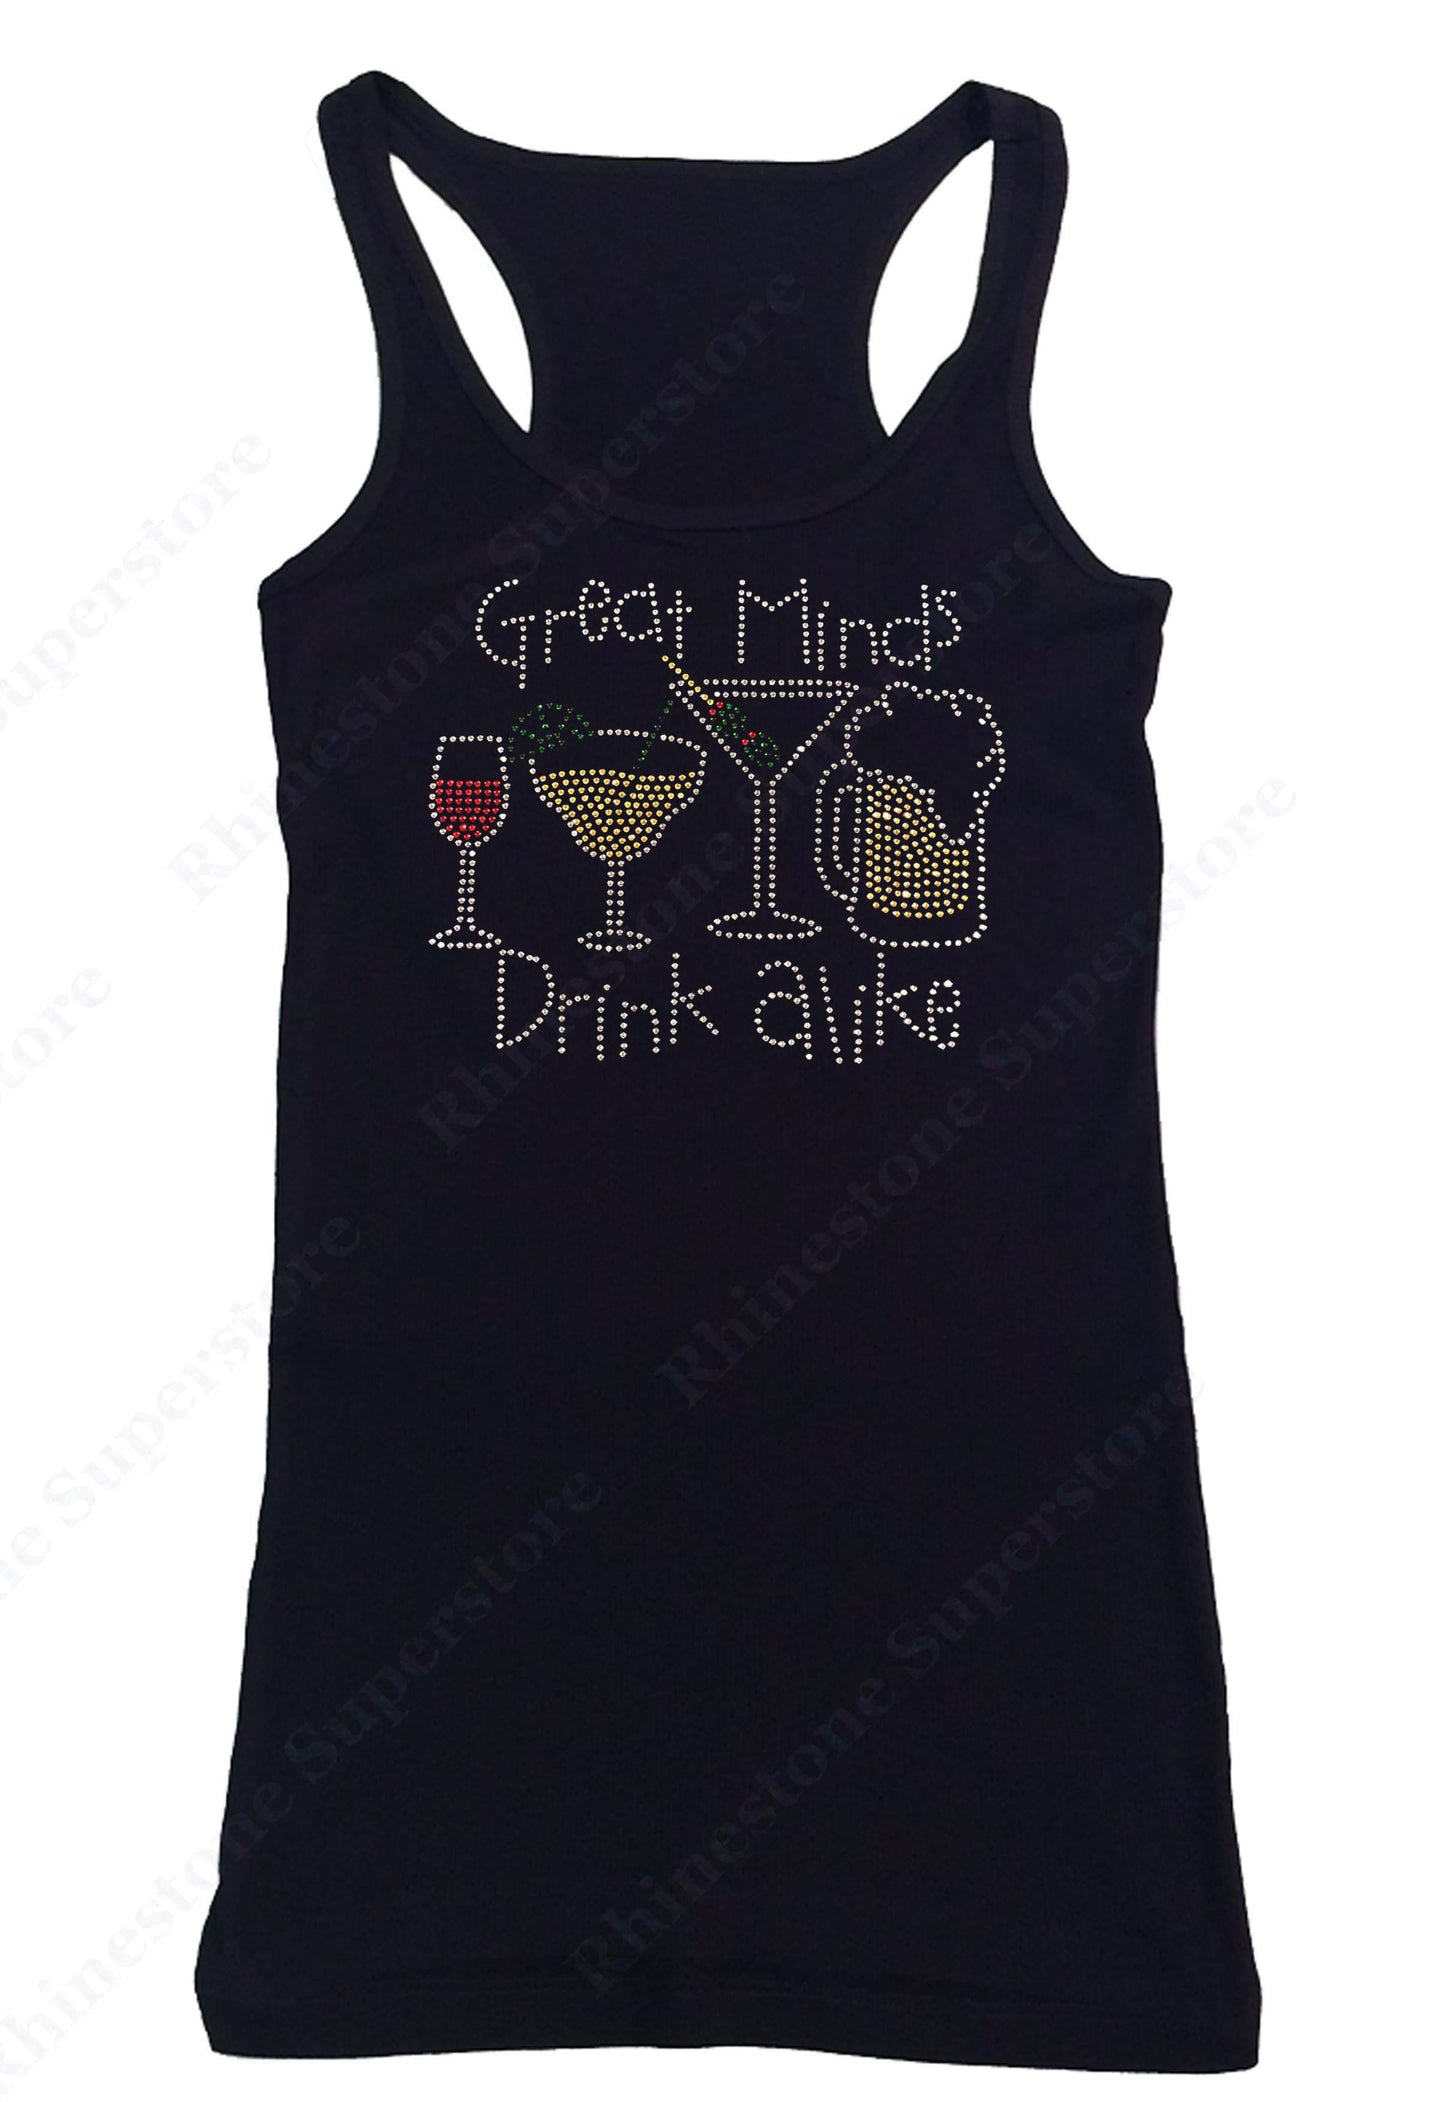 Womens T-shirt with Great Minds Drink Alike in Rhinestones